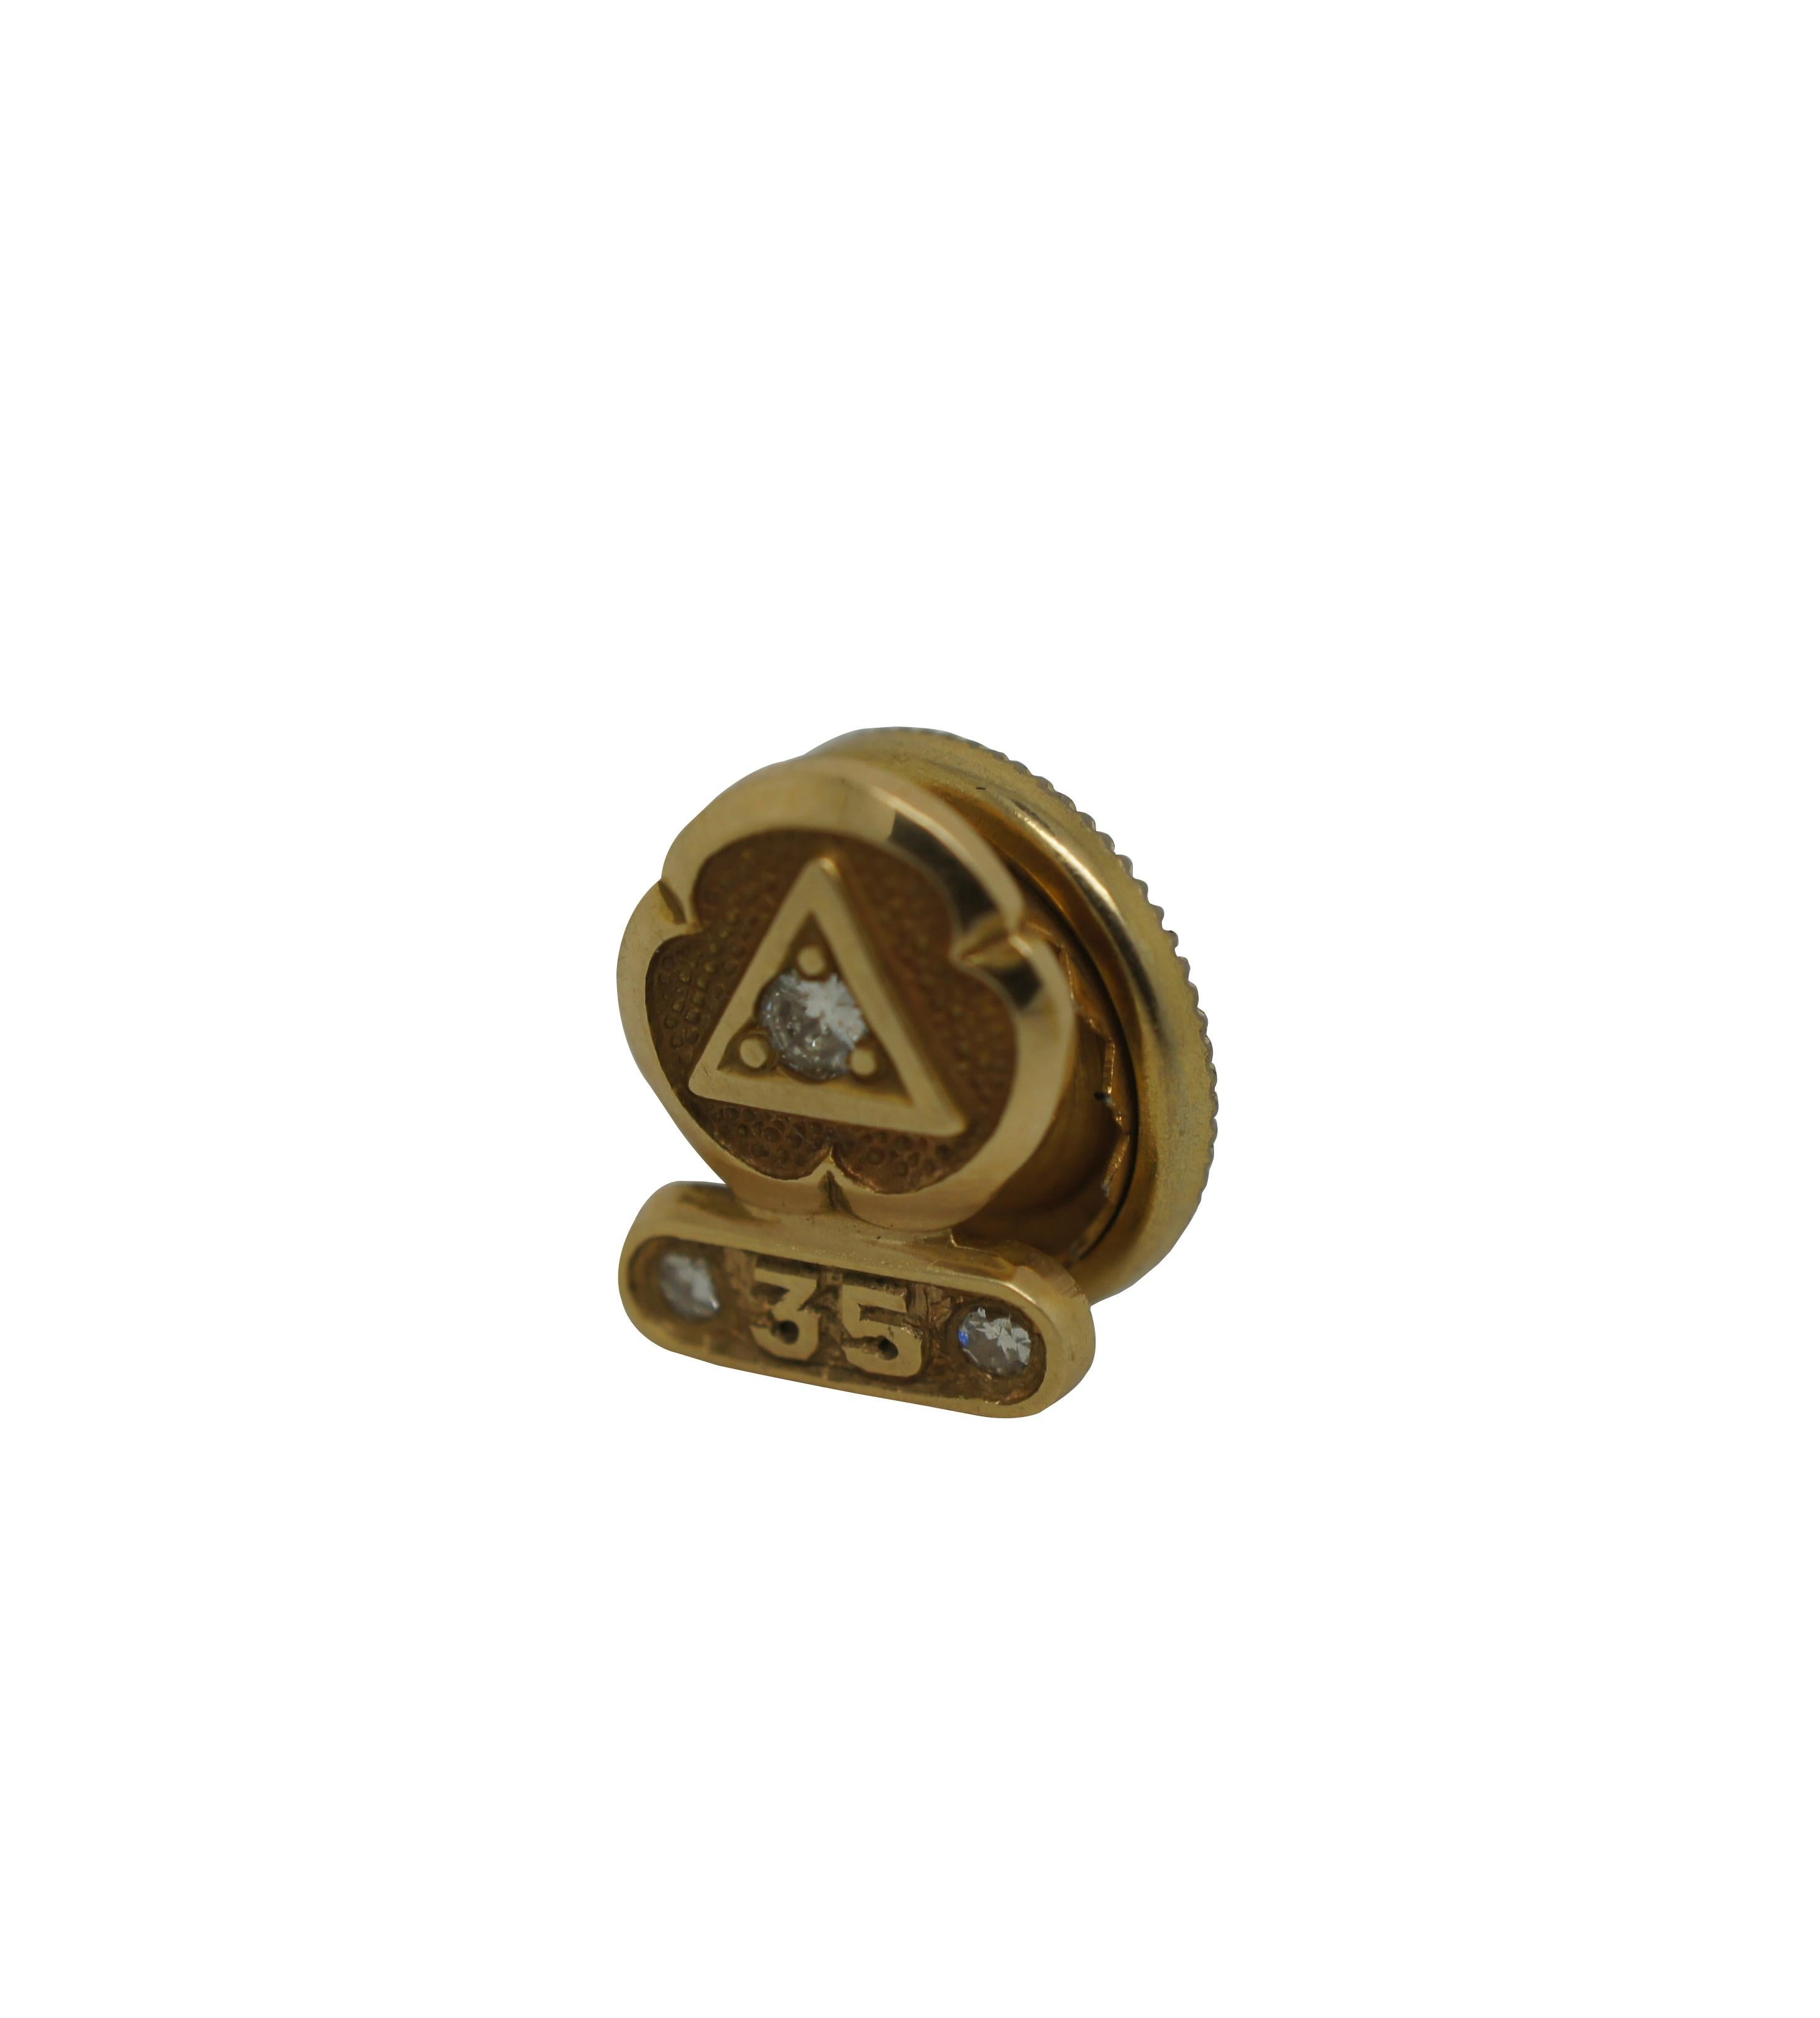 Vintage 14k gold city / employee service award tie tack / lapel pin / brooch featuring a trio of diamonds and delta triangle design.


DIMENSIONS

0.375